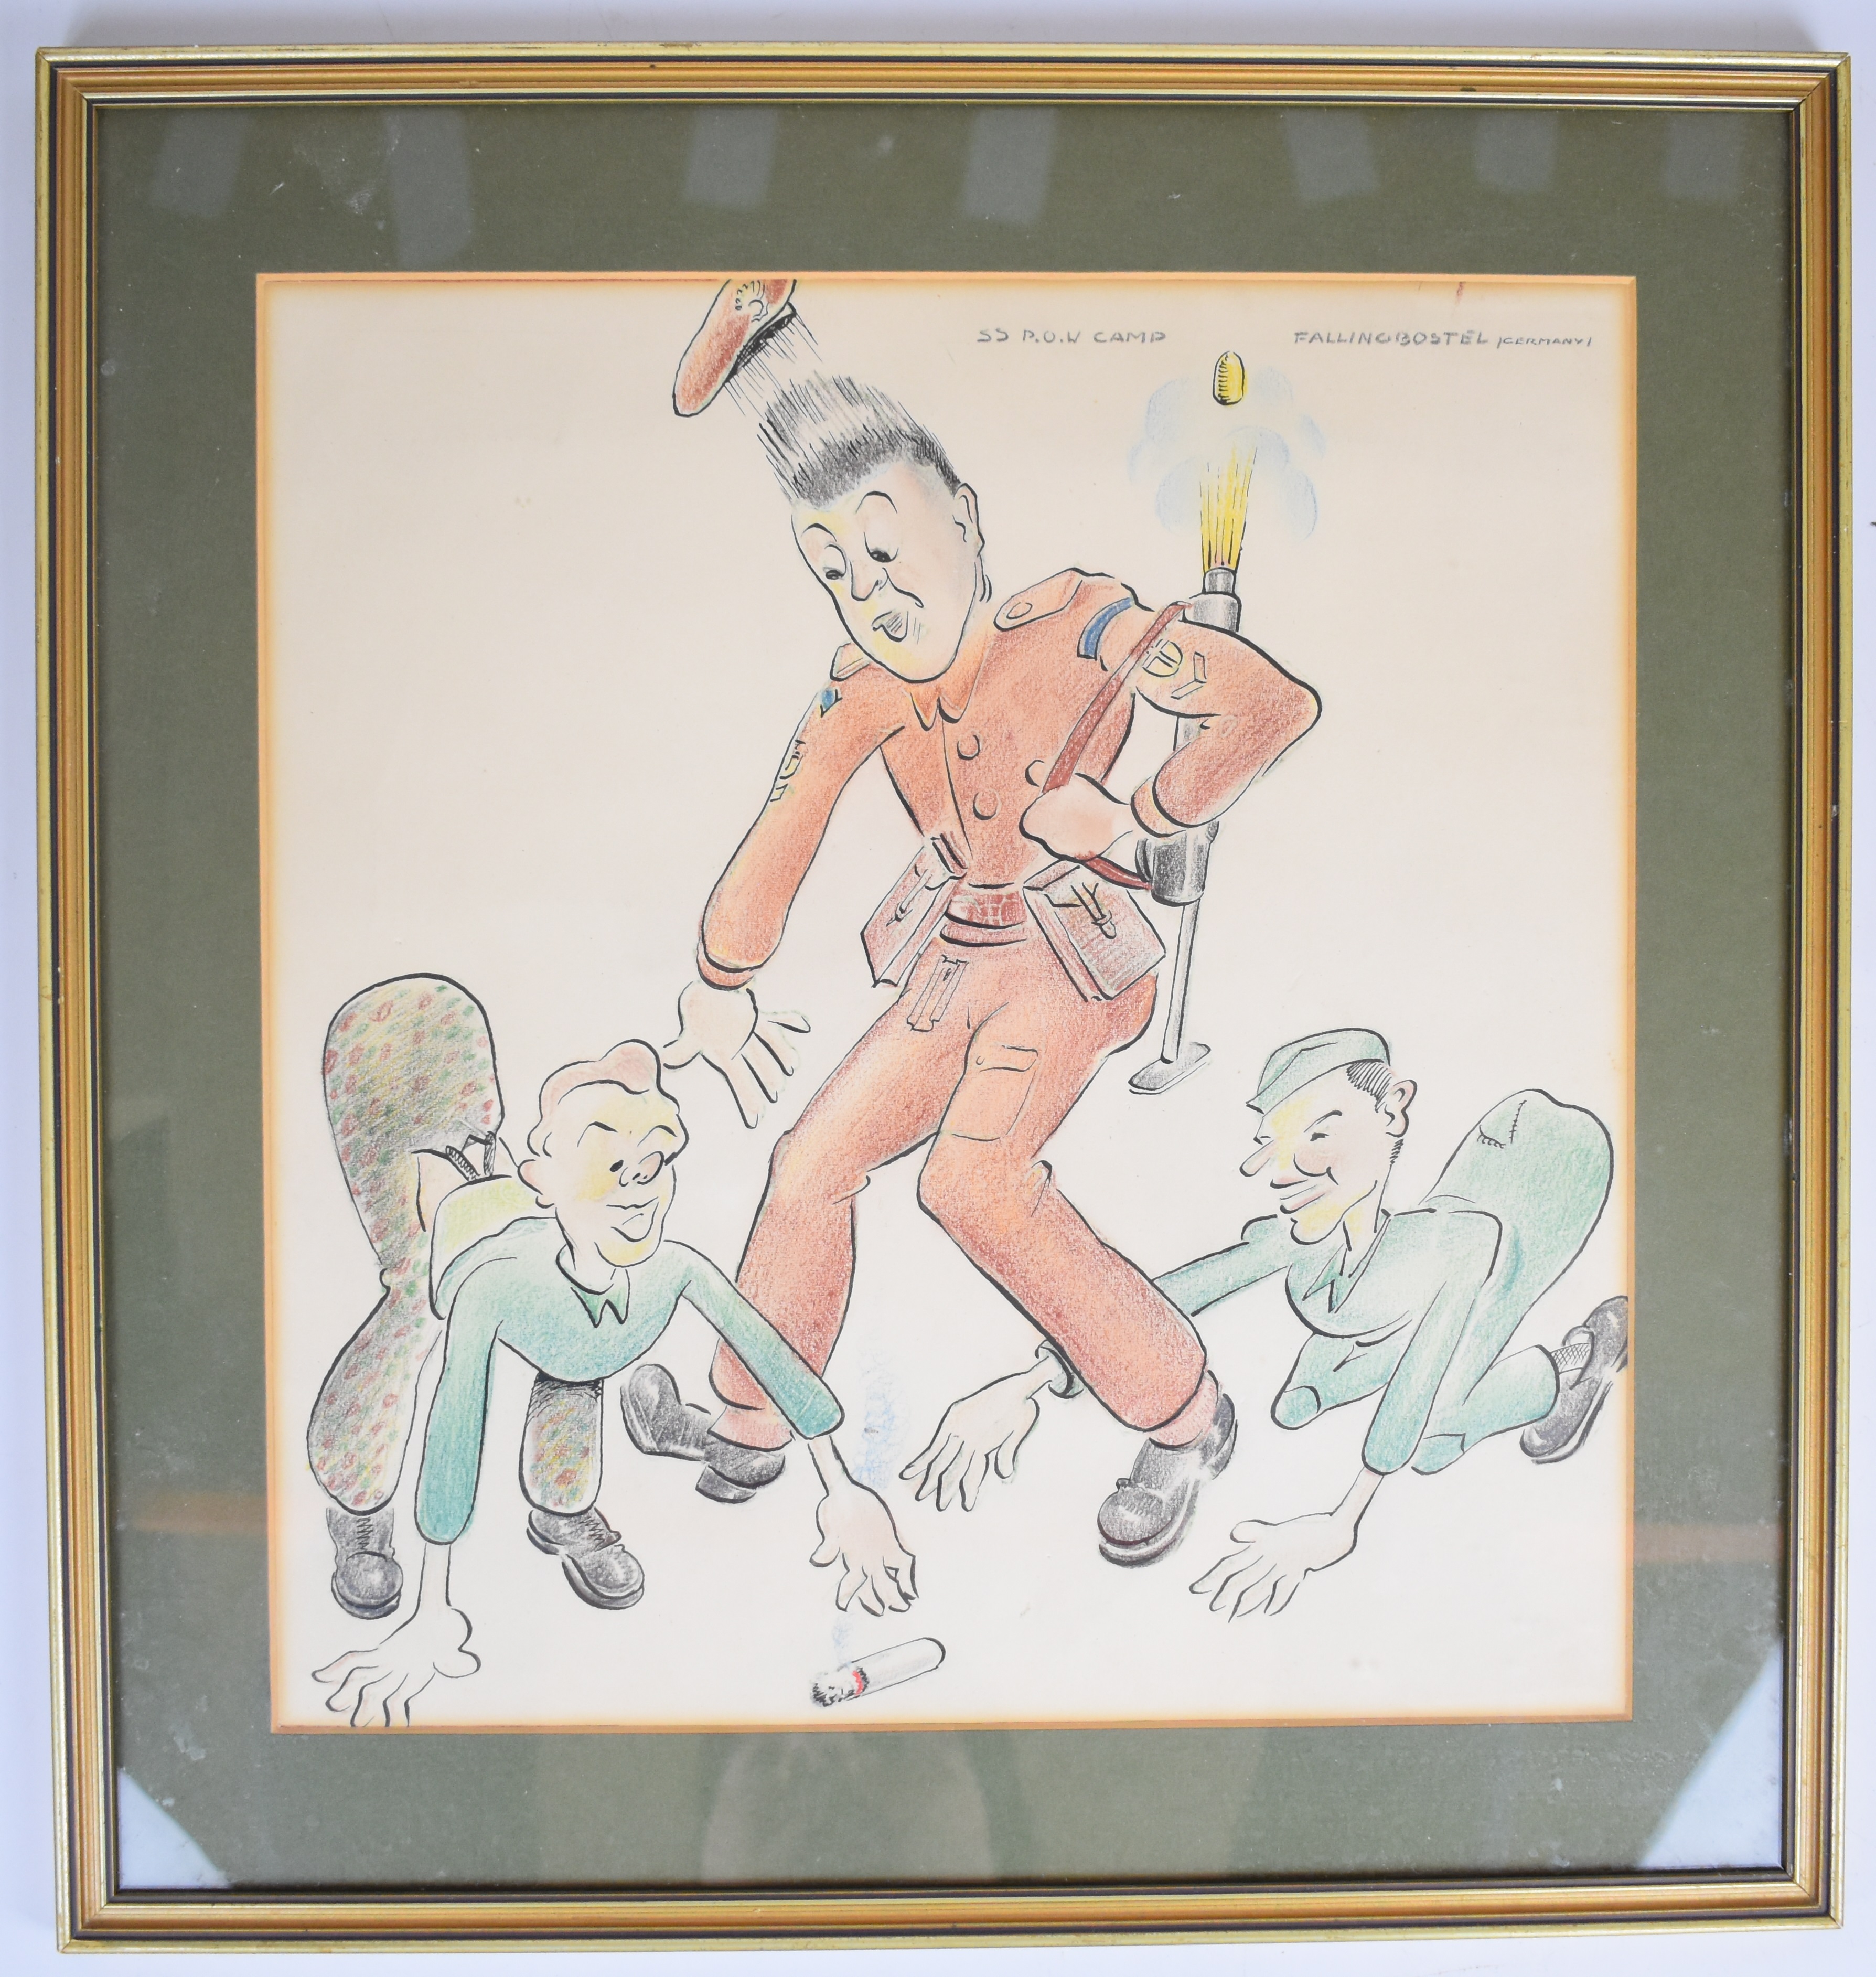 WW2 prisoner of war camp interest humorous pen ink and coloured pencil or similar cartoon, depicting - Image 3 of 4